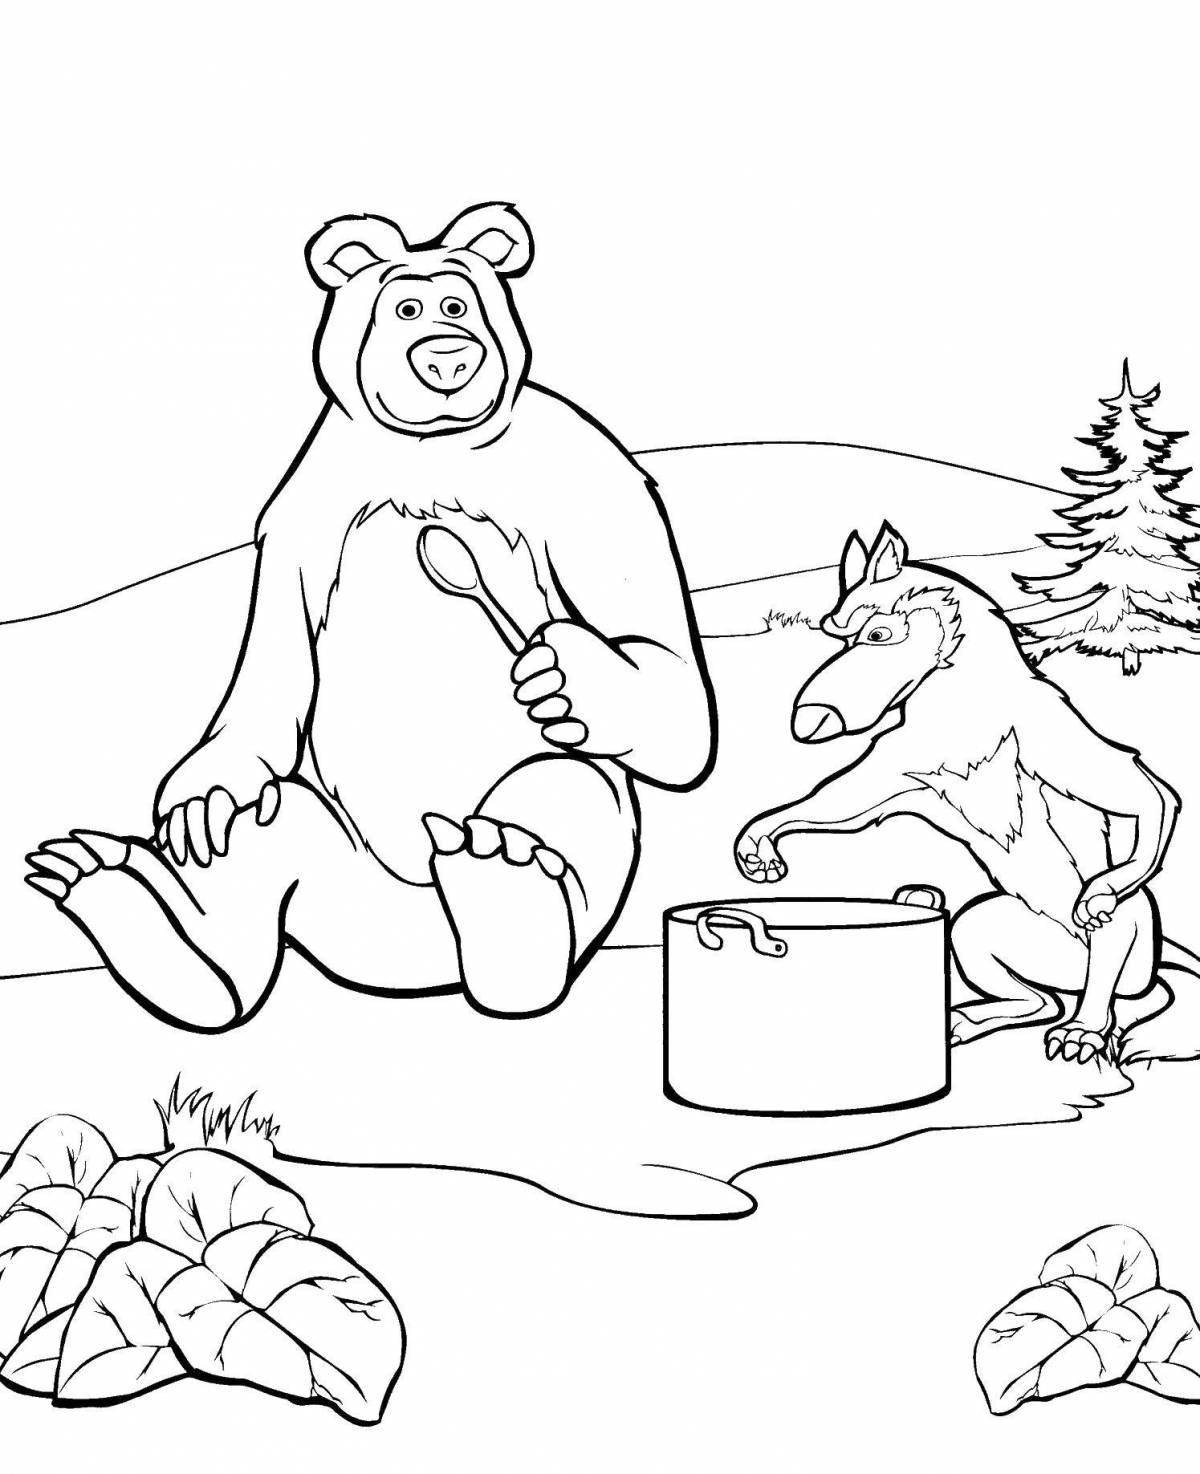 Colorful teddy bear and teddy bear coloring book